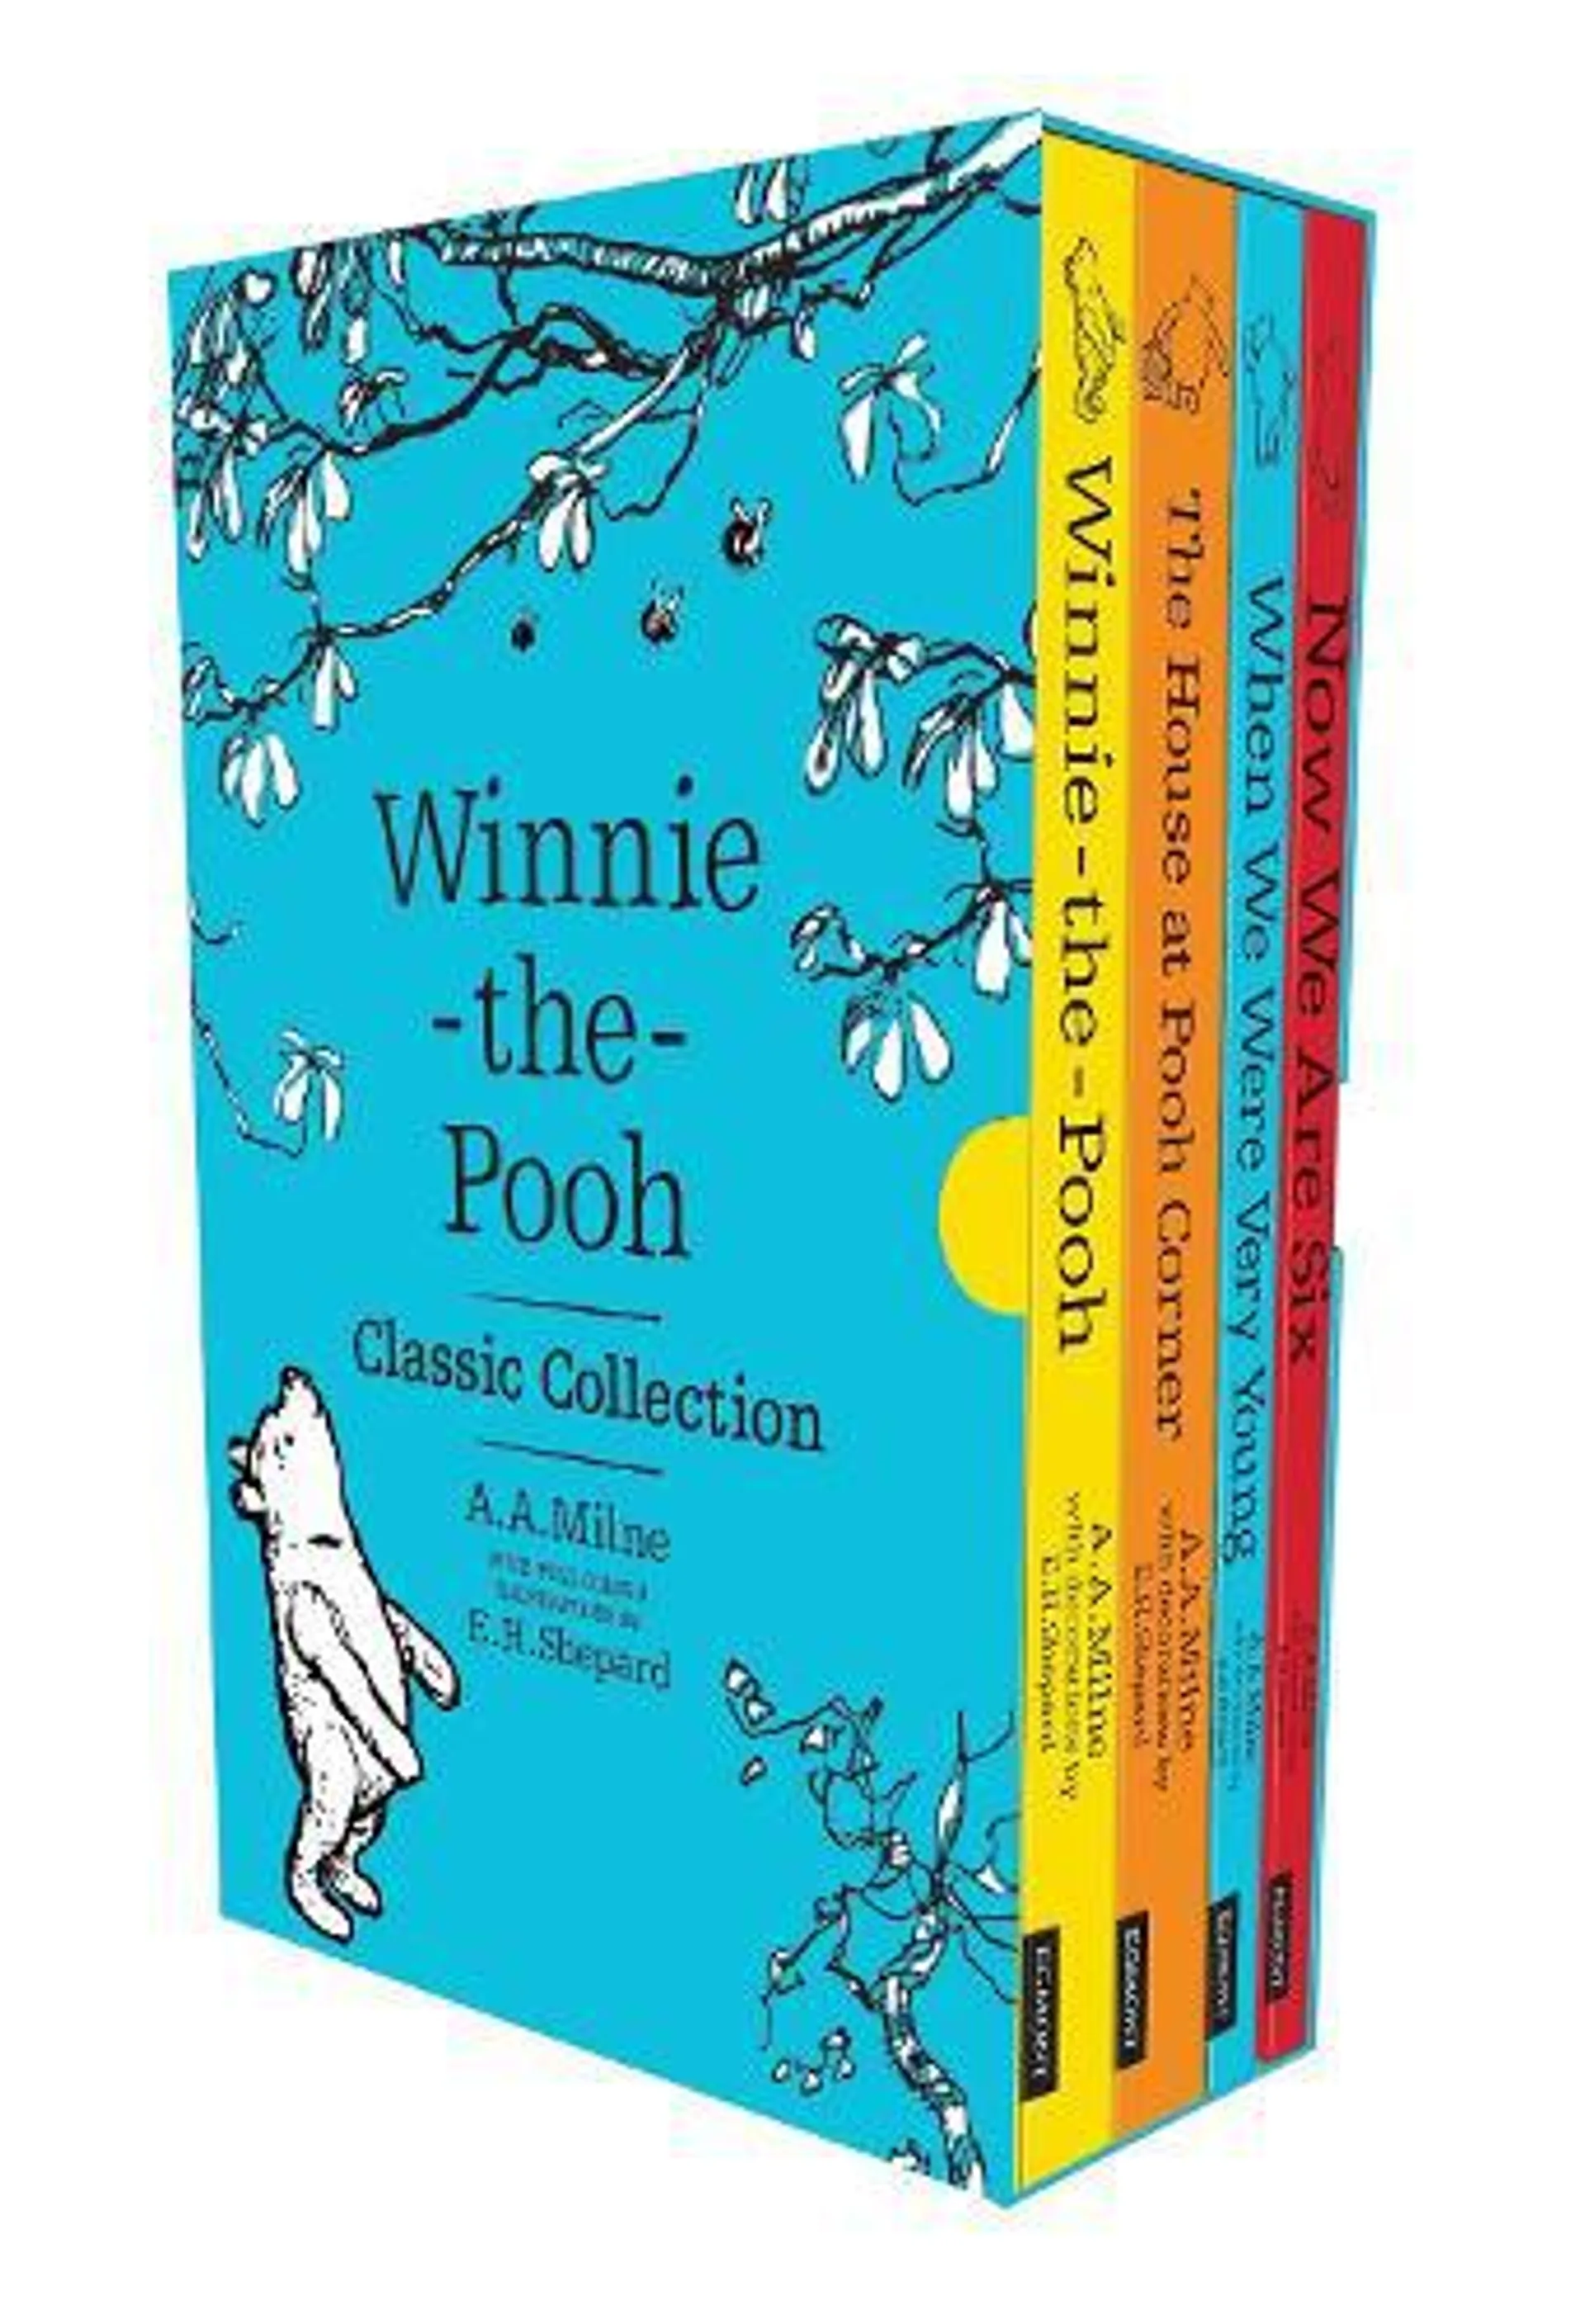 Winnie-the-Pooh Classic Collection (Paperback)